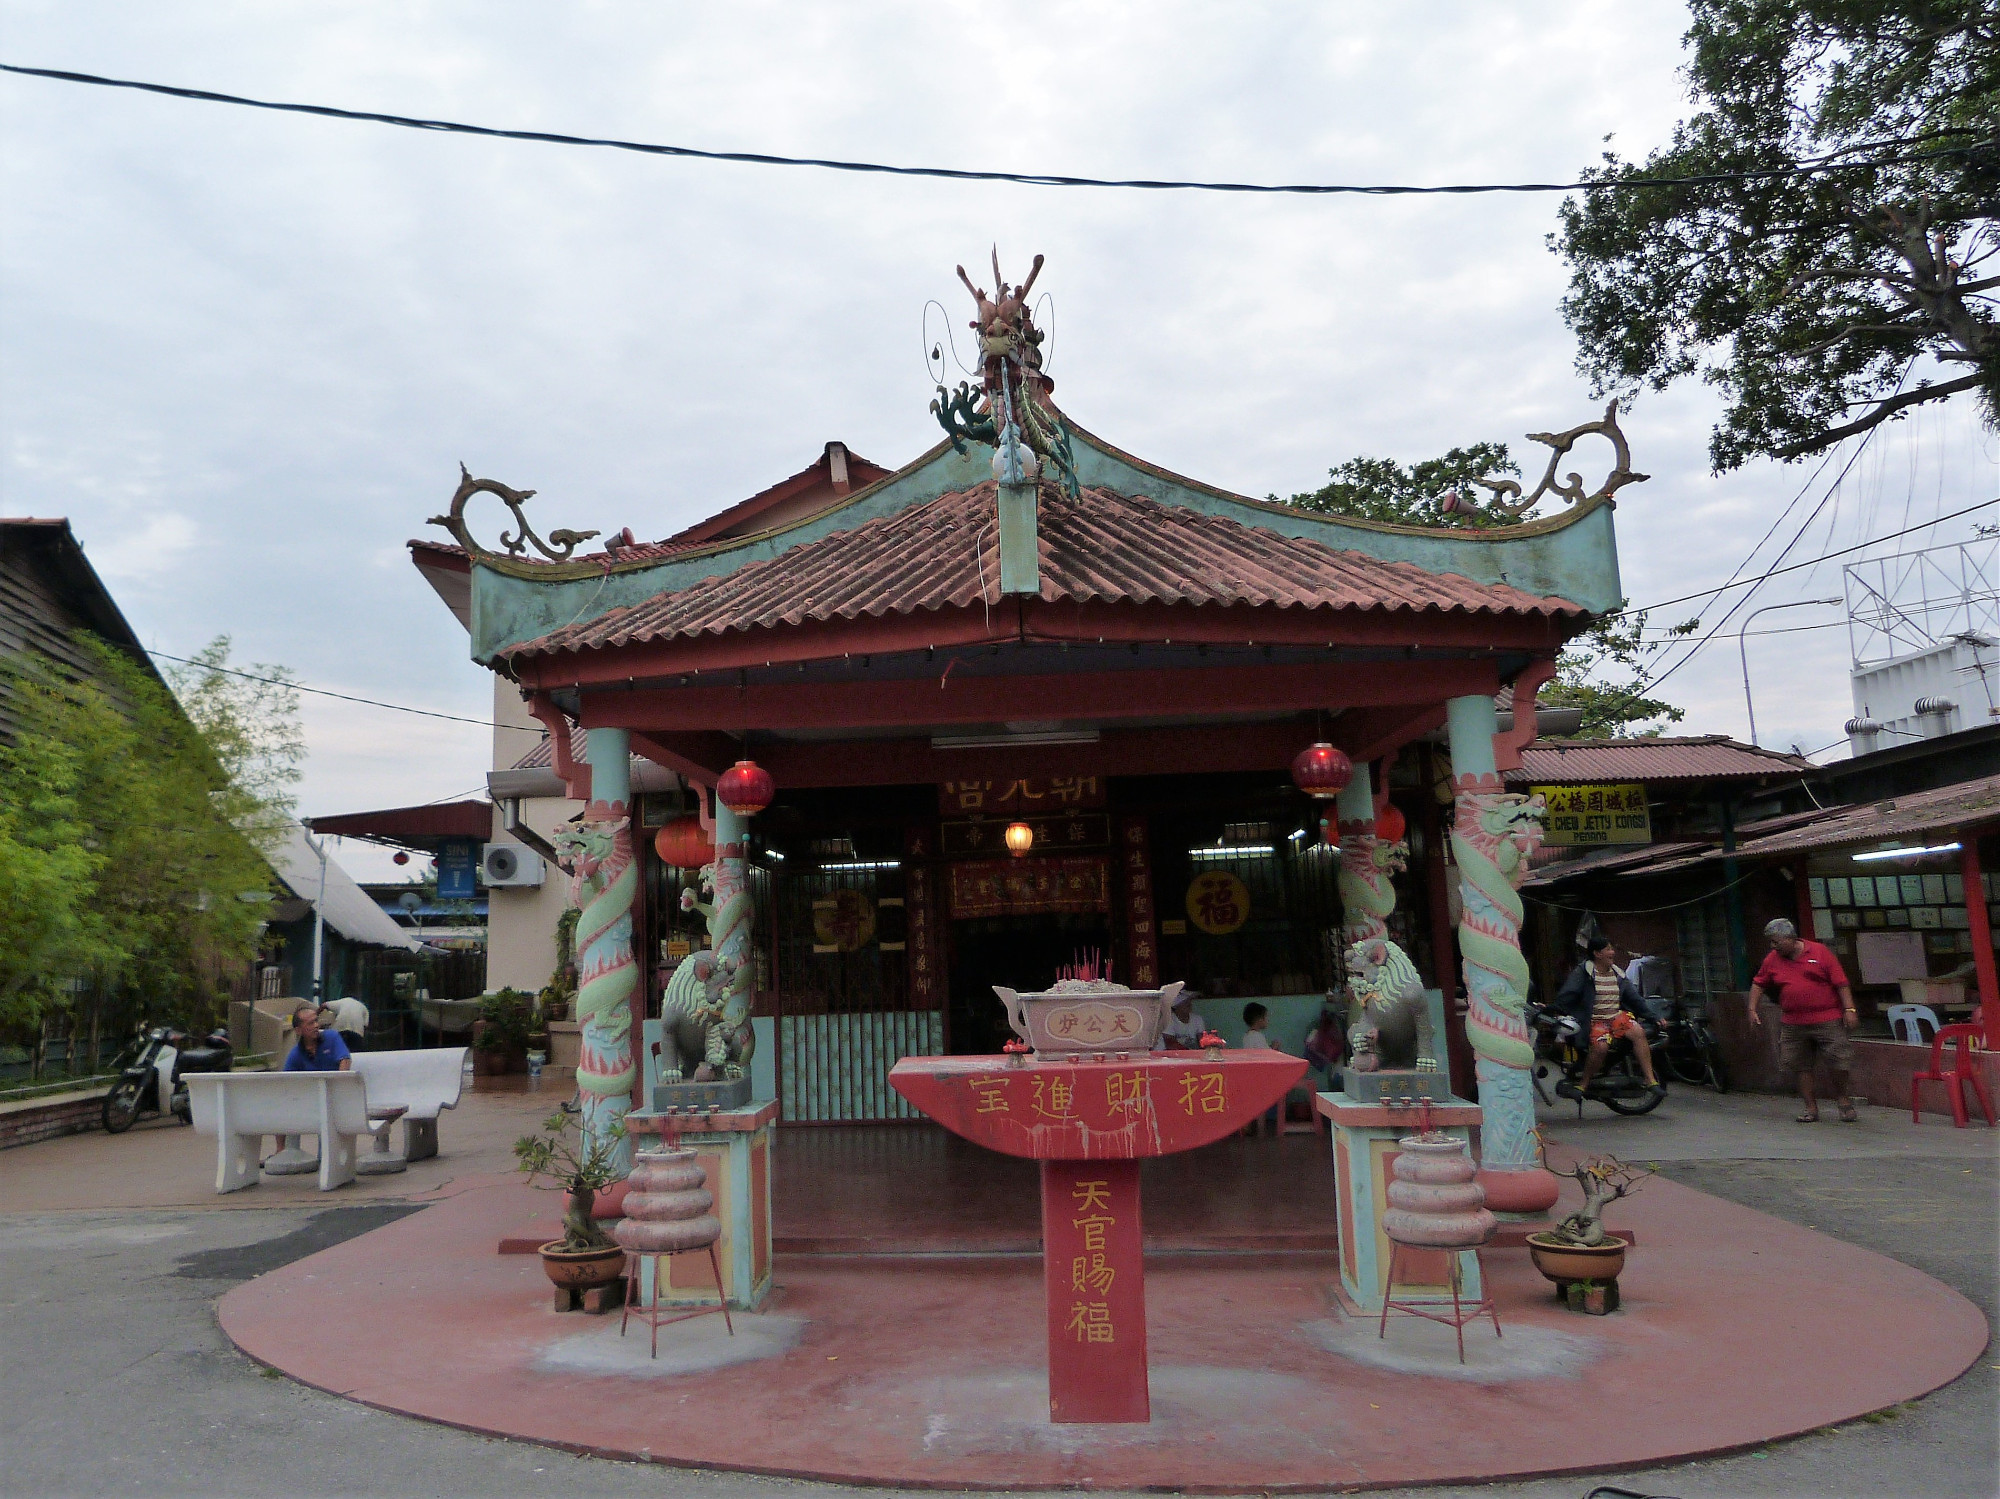 Temple entrance to Chew Jetty